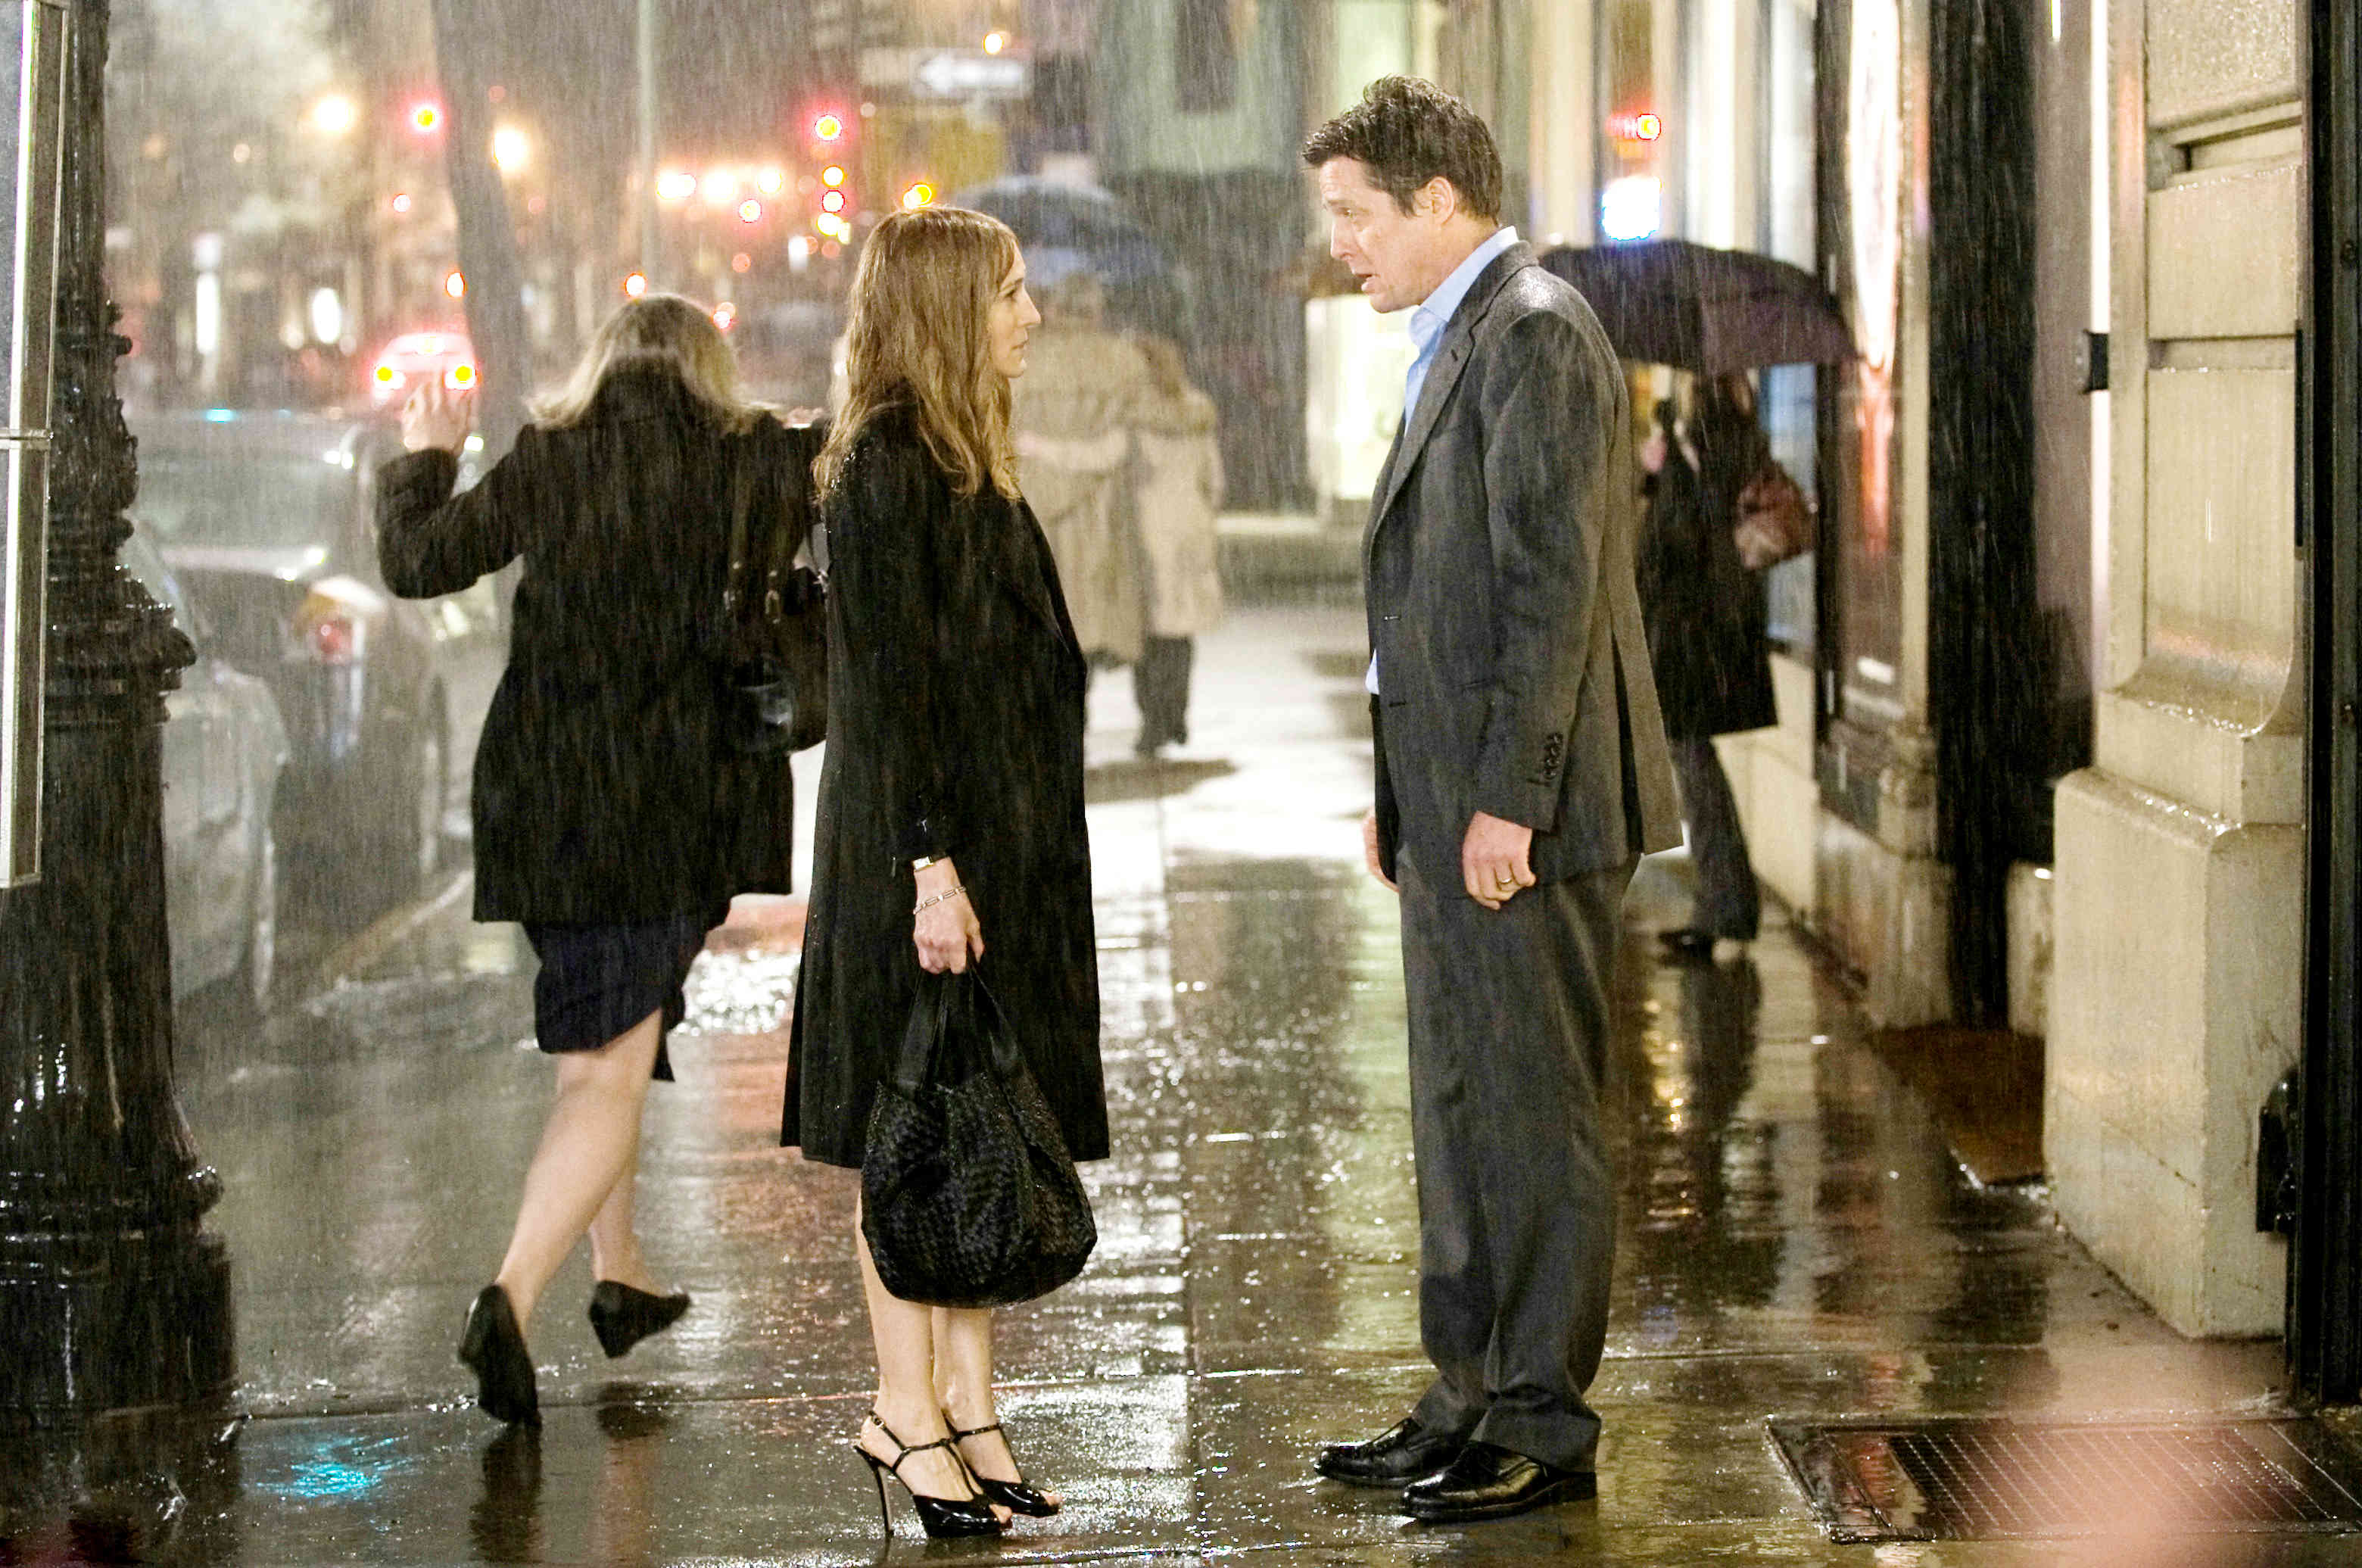 Sarah Jessica Parker stars as Meryl Morris and Hugh Grant stars as Paul Morris in Columbia Pictures' Did You Hear About the Morgans? (2009)